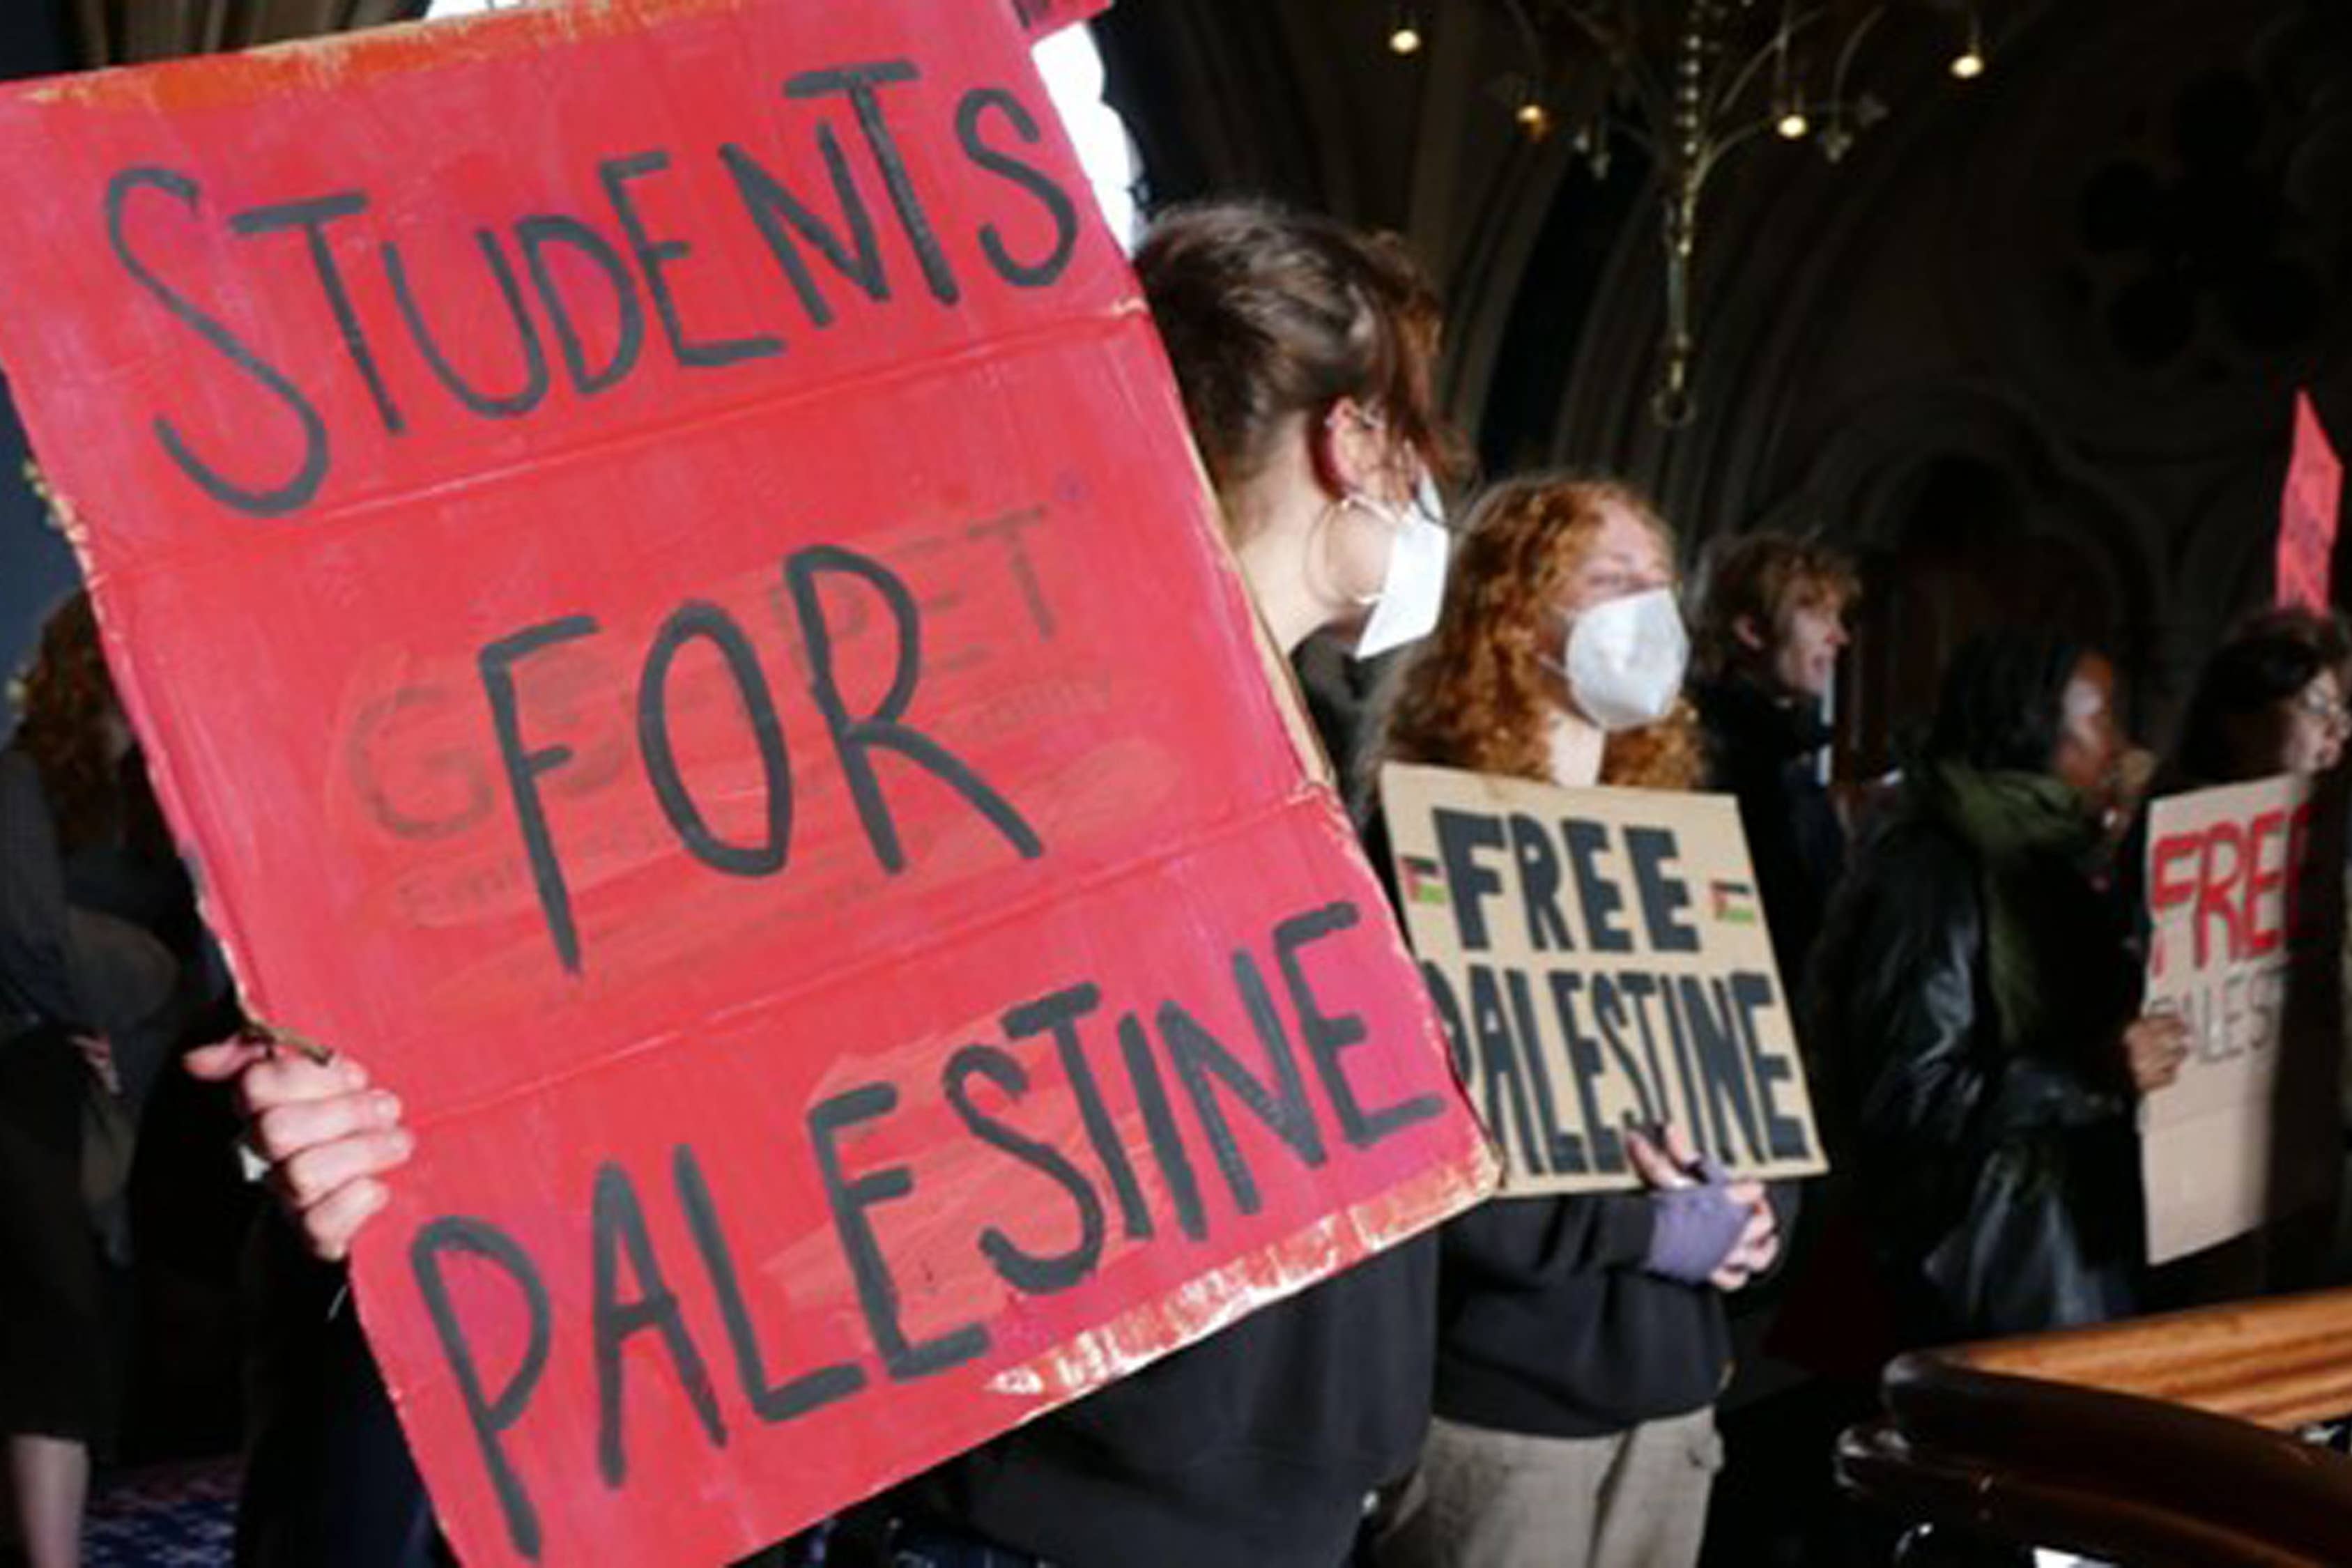 Students demand support for Gaza at the University of Glasgow (Lachlan Macrae/PA Wire).